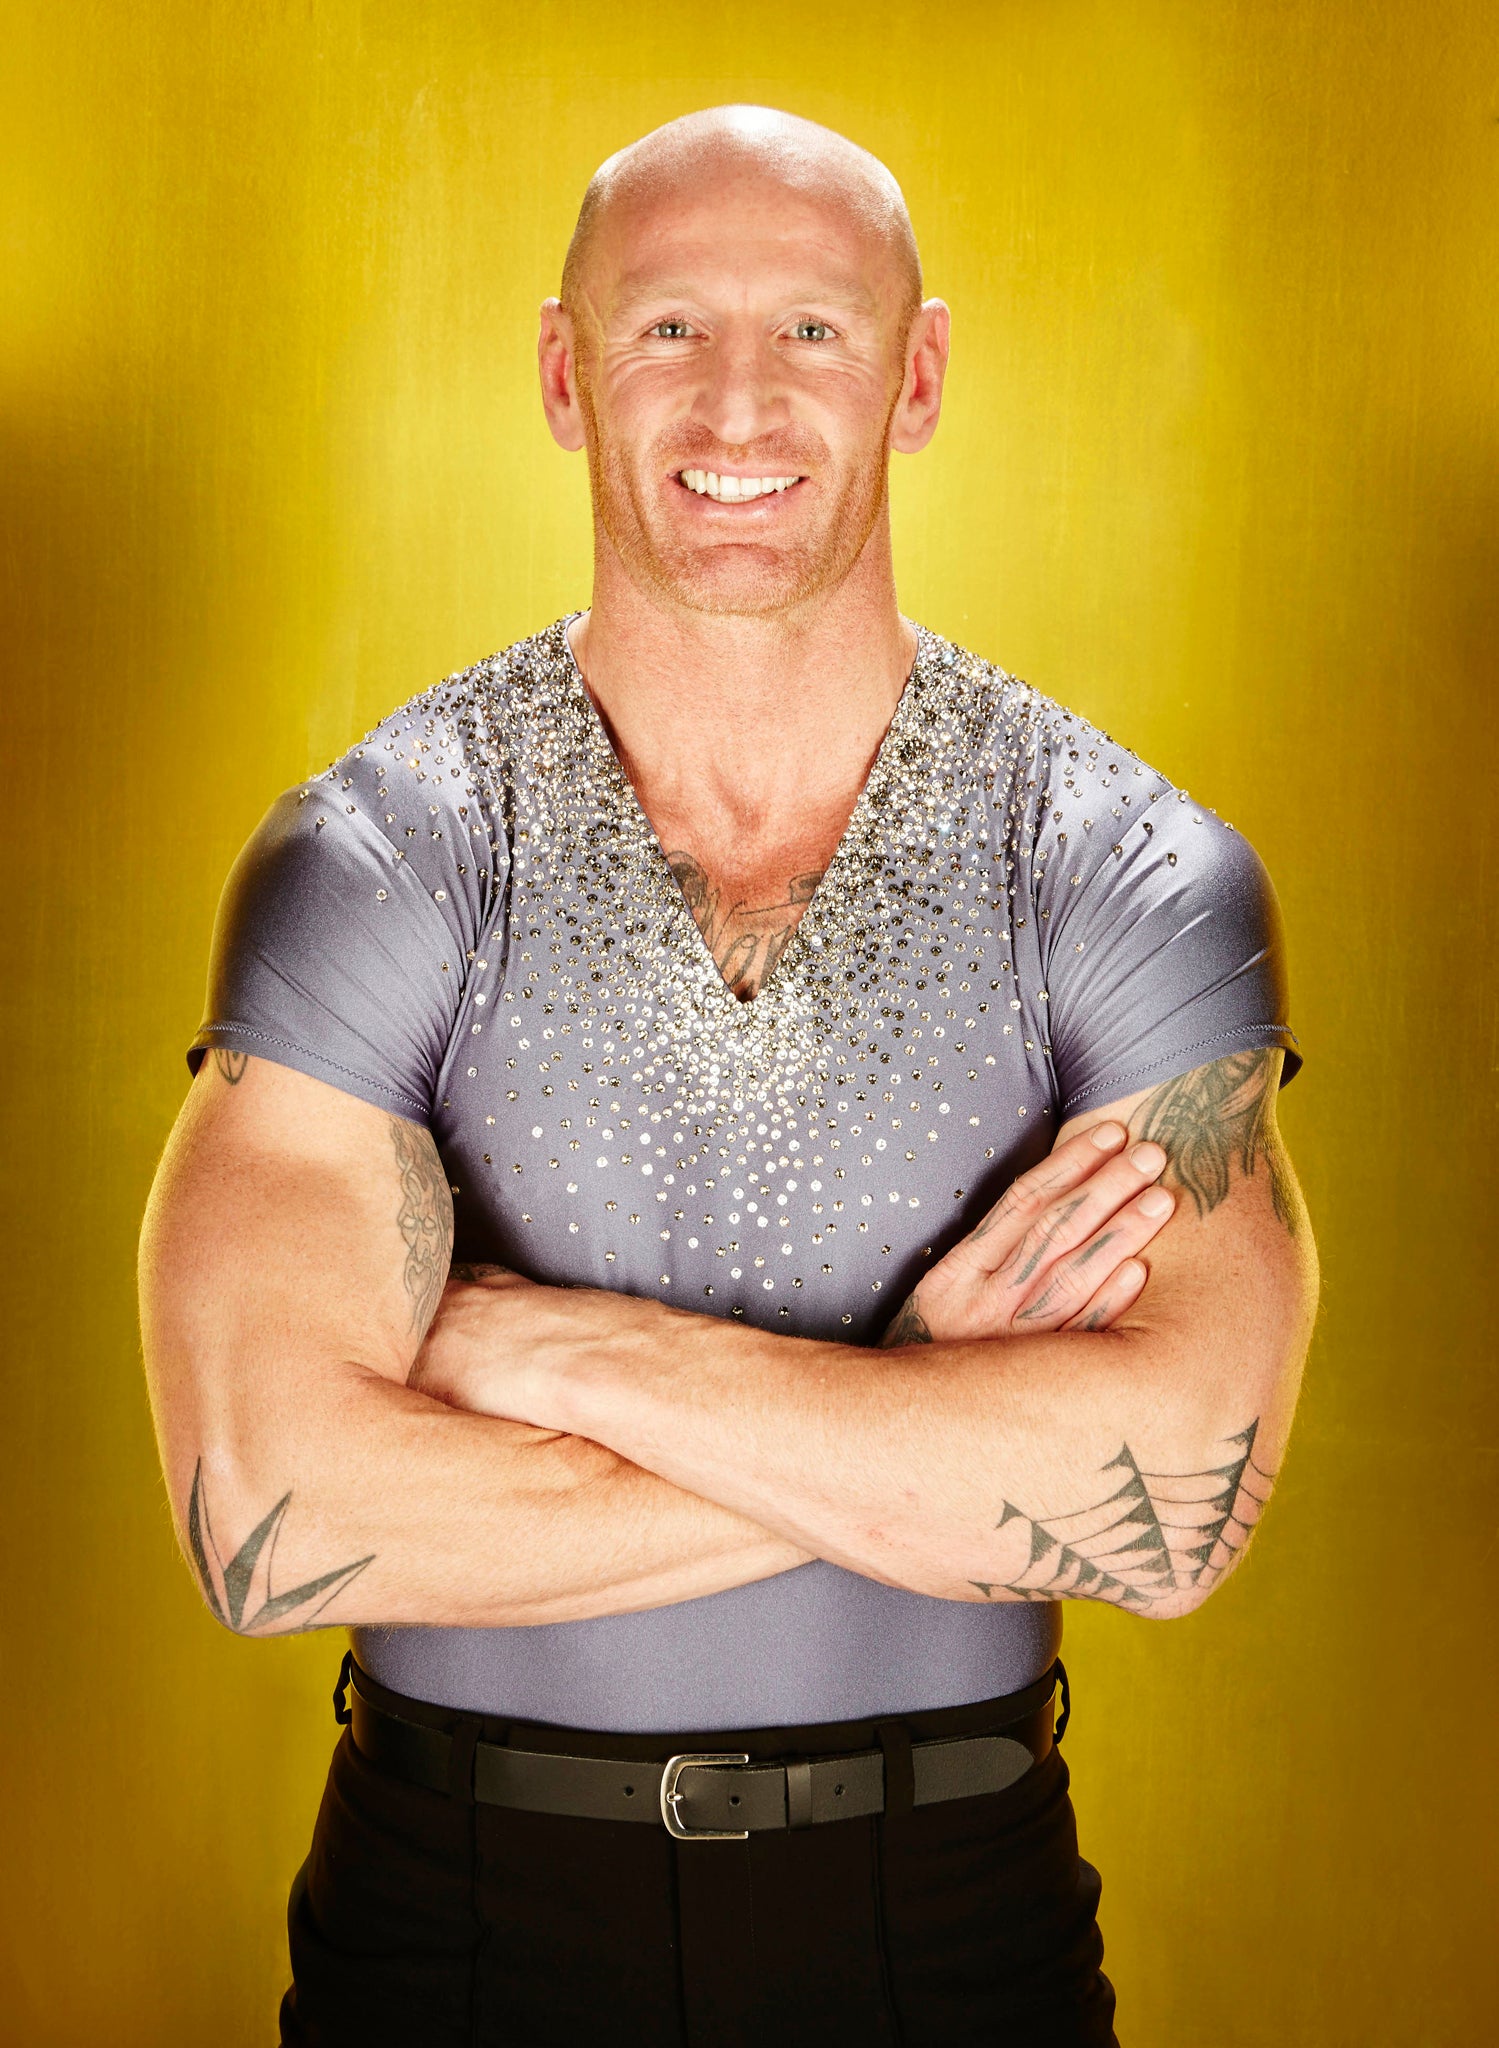 Gareth Thomas Age: 38 Skating with: Robin Johnstone. Famous for: Coming out as gay in 2009 in an attempt to highlight the homophobia he claimed was rampant in spo